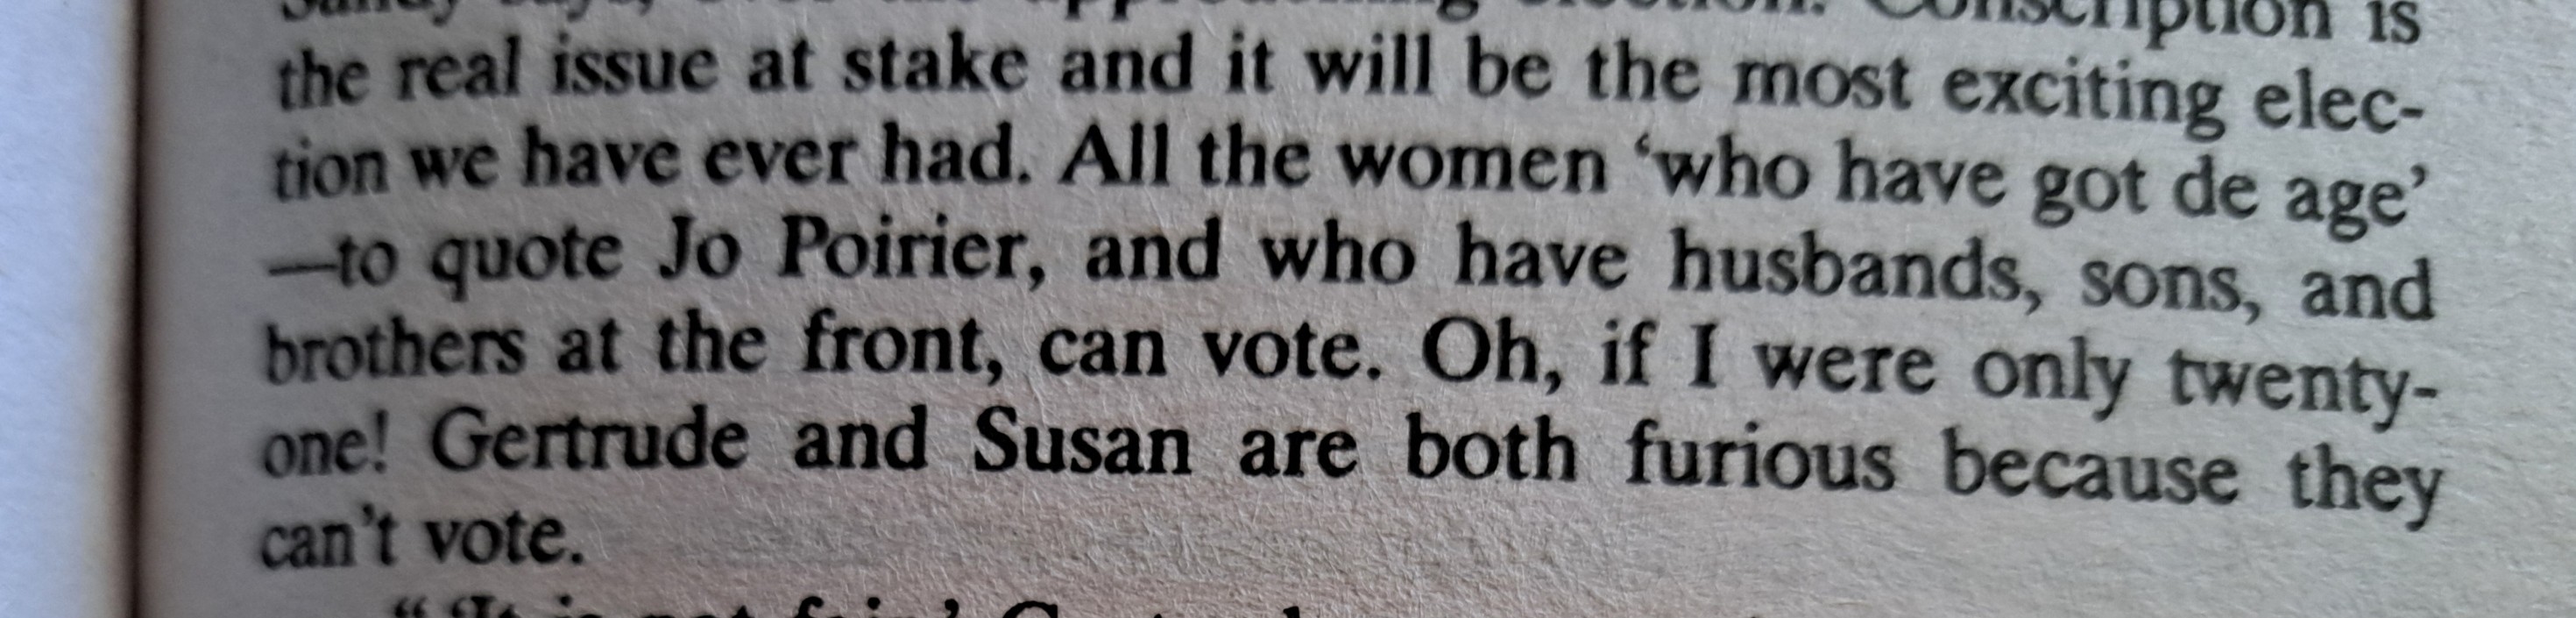 "Conscription is the real issue at stake and it will be the most exciting election we ever had. All the women 'who have got de age'—to quote Jo Poirier, and who have husbands, sons, and brothers at the front, can vote. Oh, if I were only twenty-one! Gertrude and Susan are both furious because they can't vote."